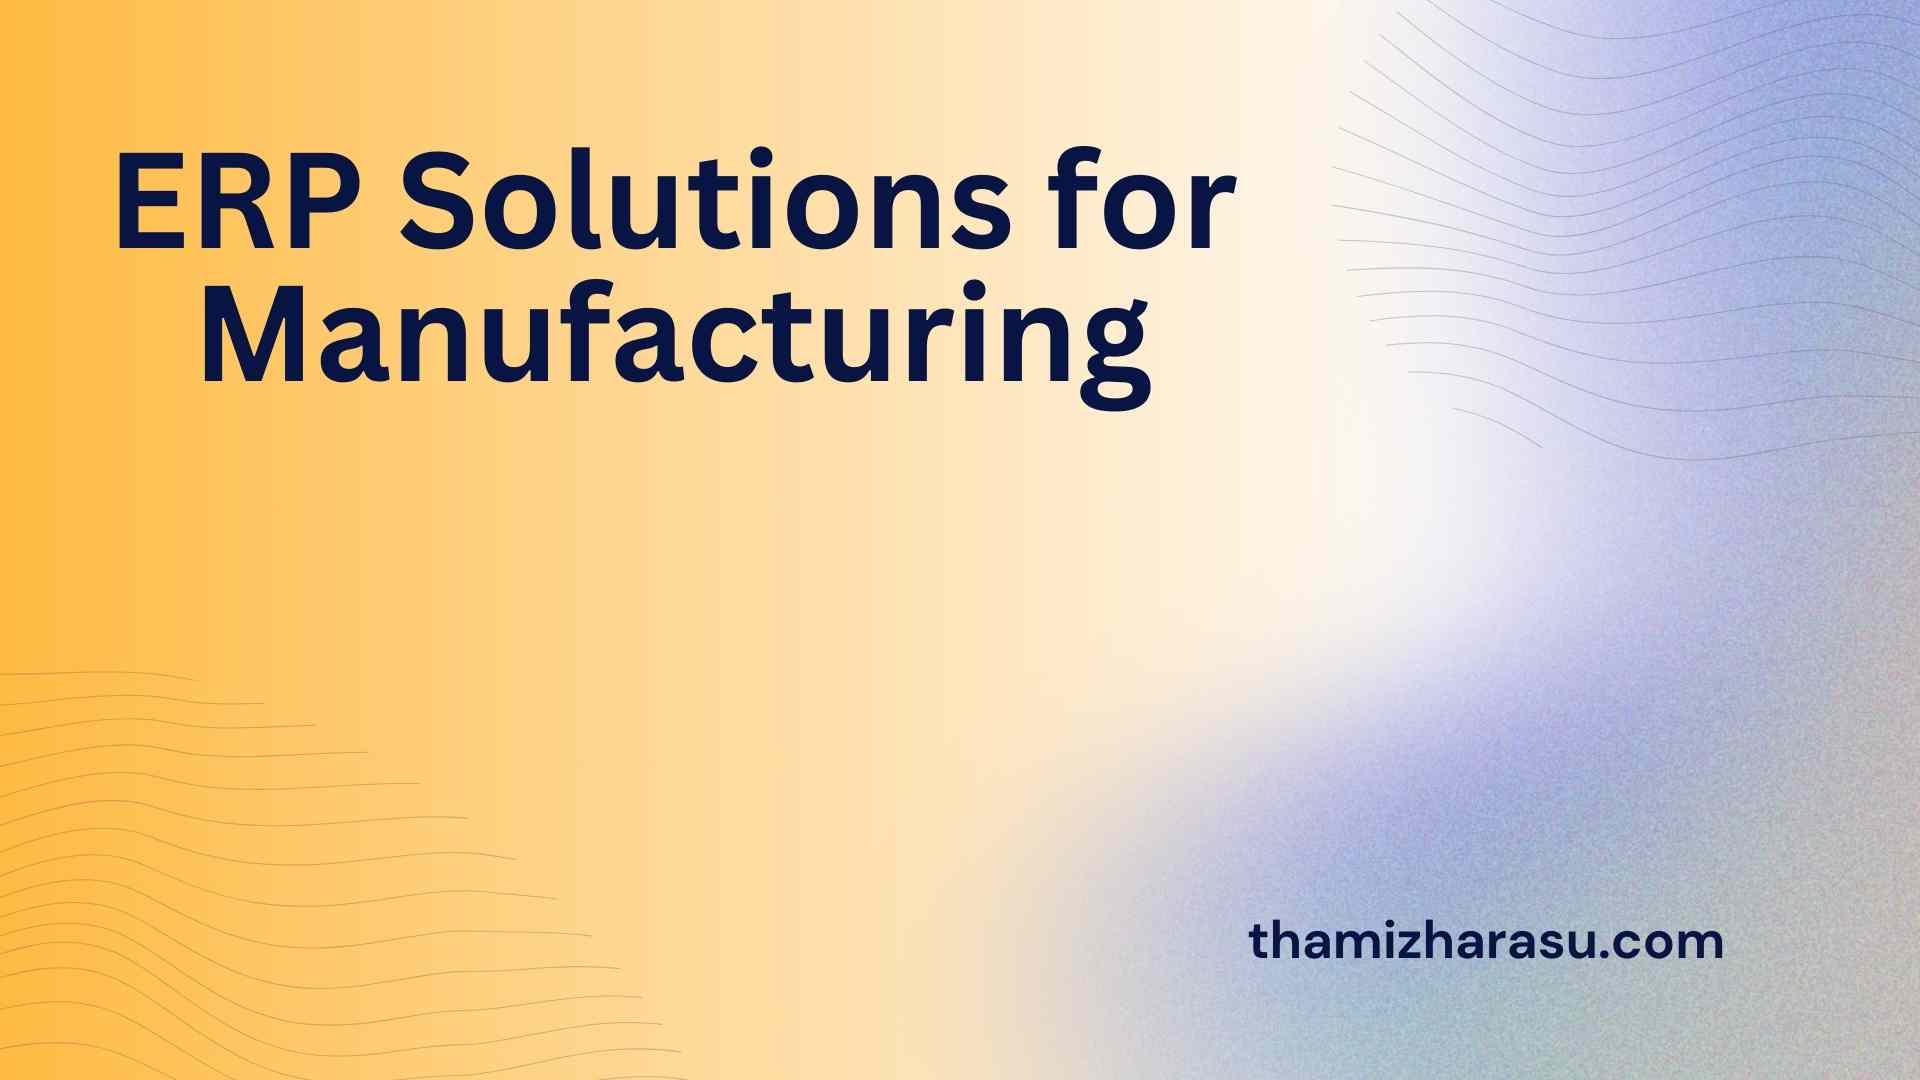 erp solutions for manufacturing